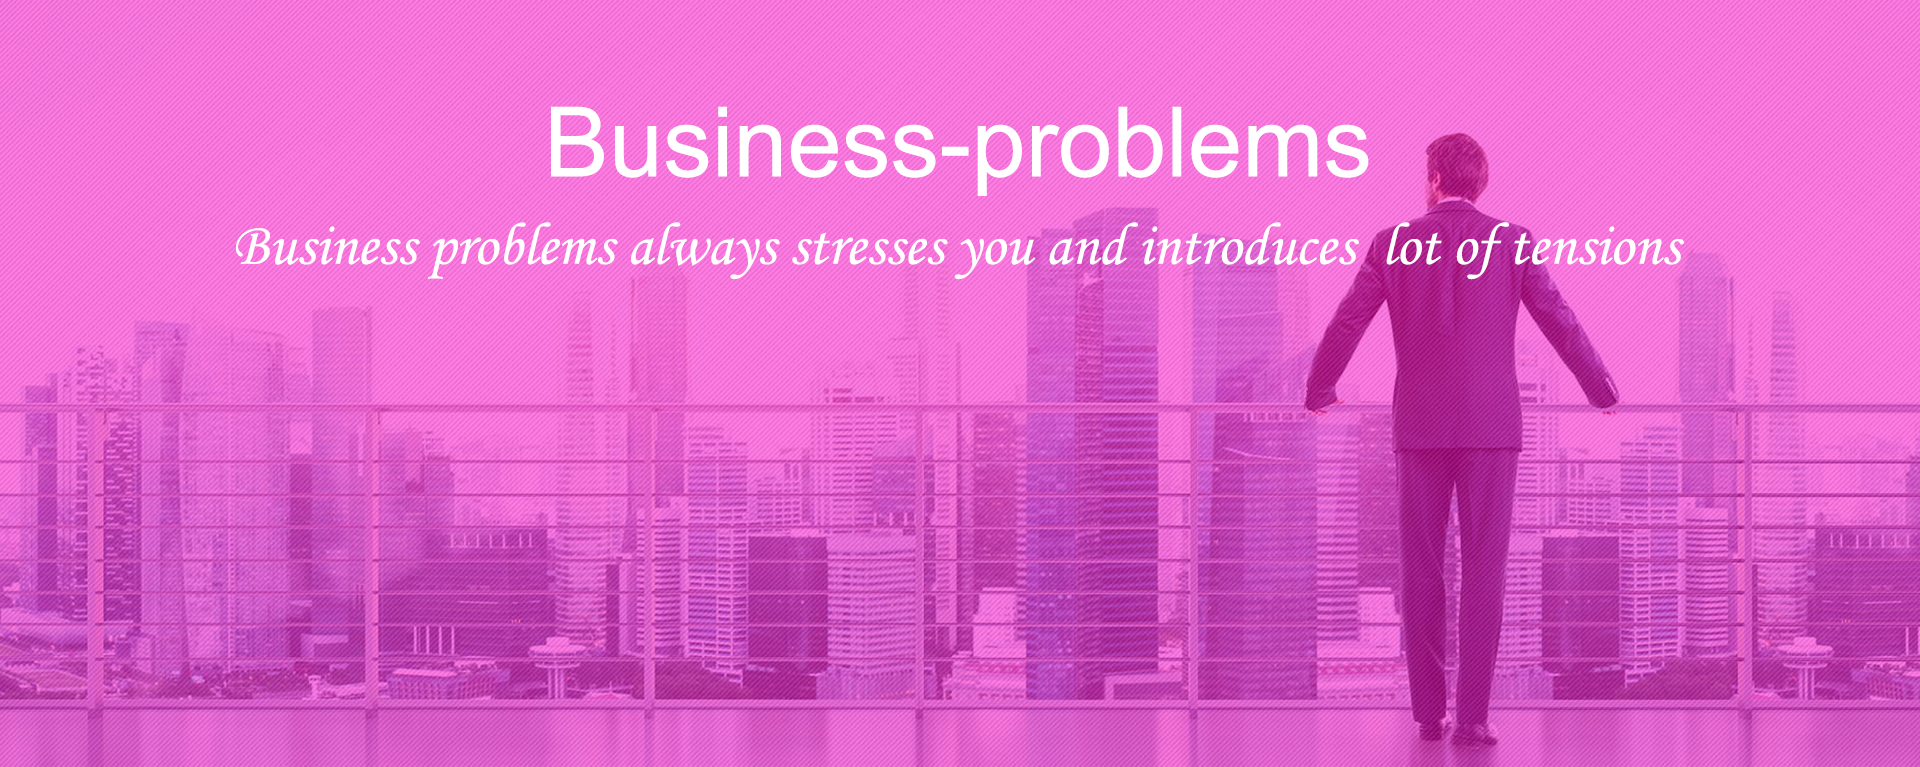 business problems